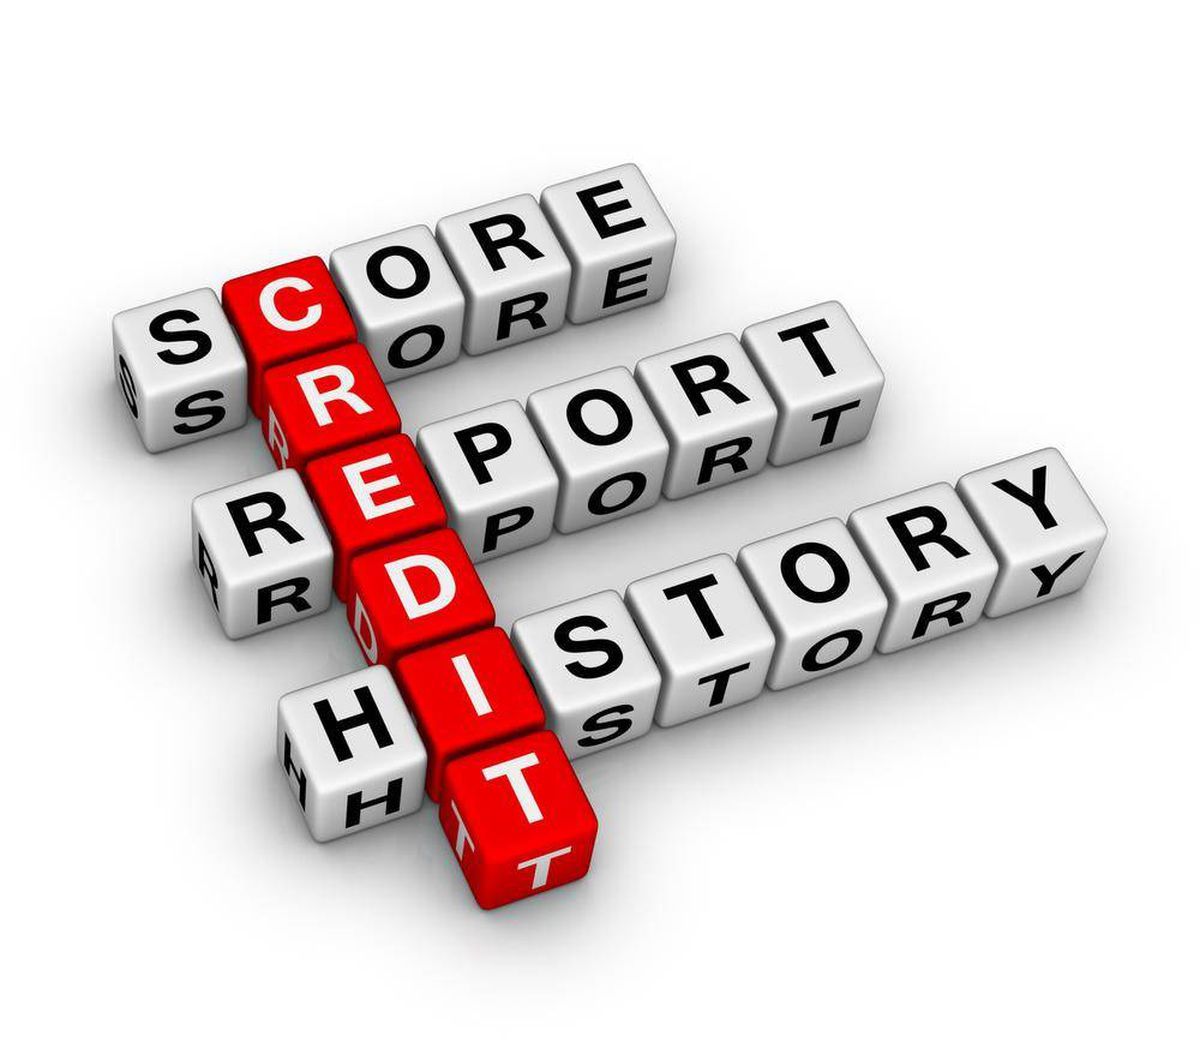 How Do Late Payments Impact Your Credit Score and Future Borrowing Opportunities?